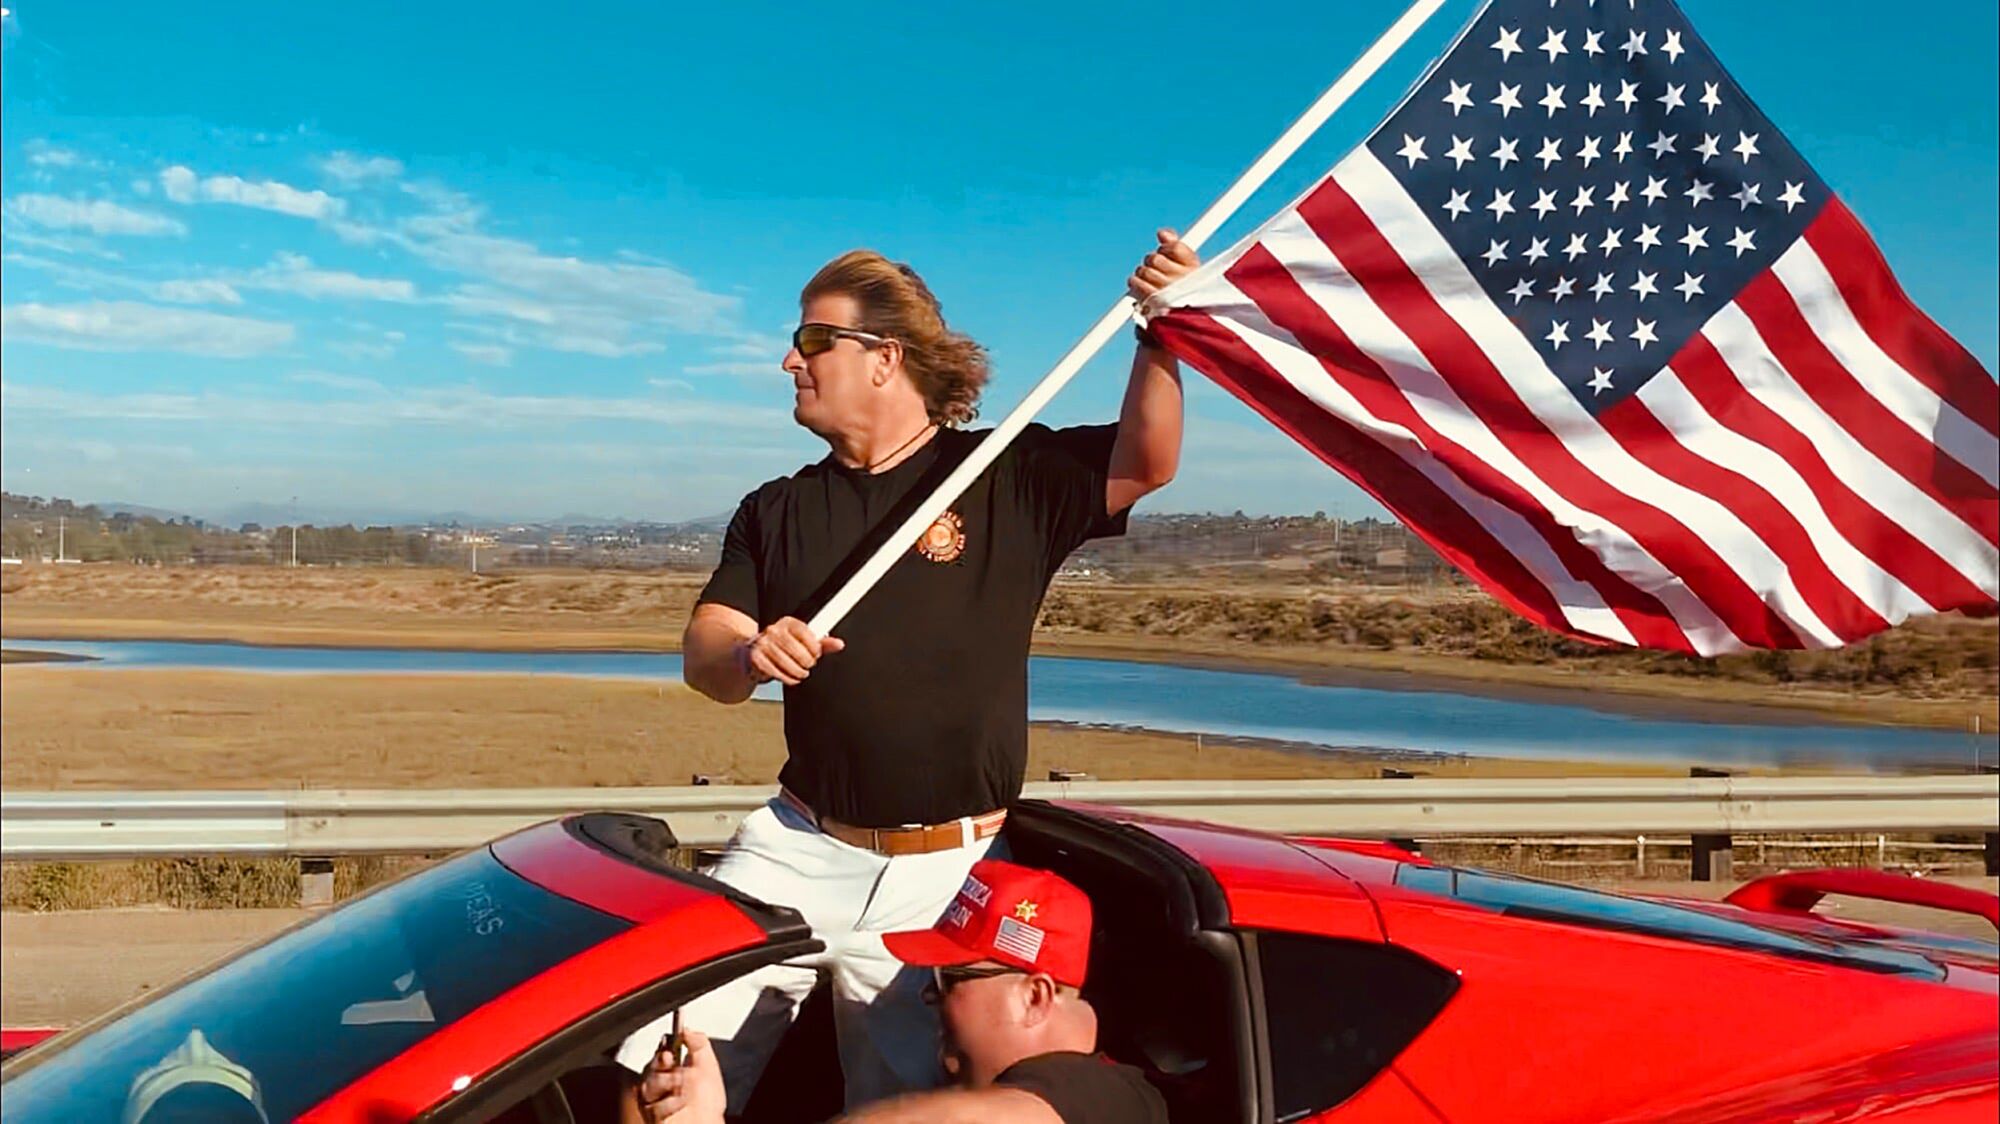 Morton Irvine Smith holds a U.S. flag in Russ Taylor's red Corvette.